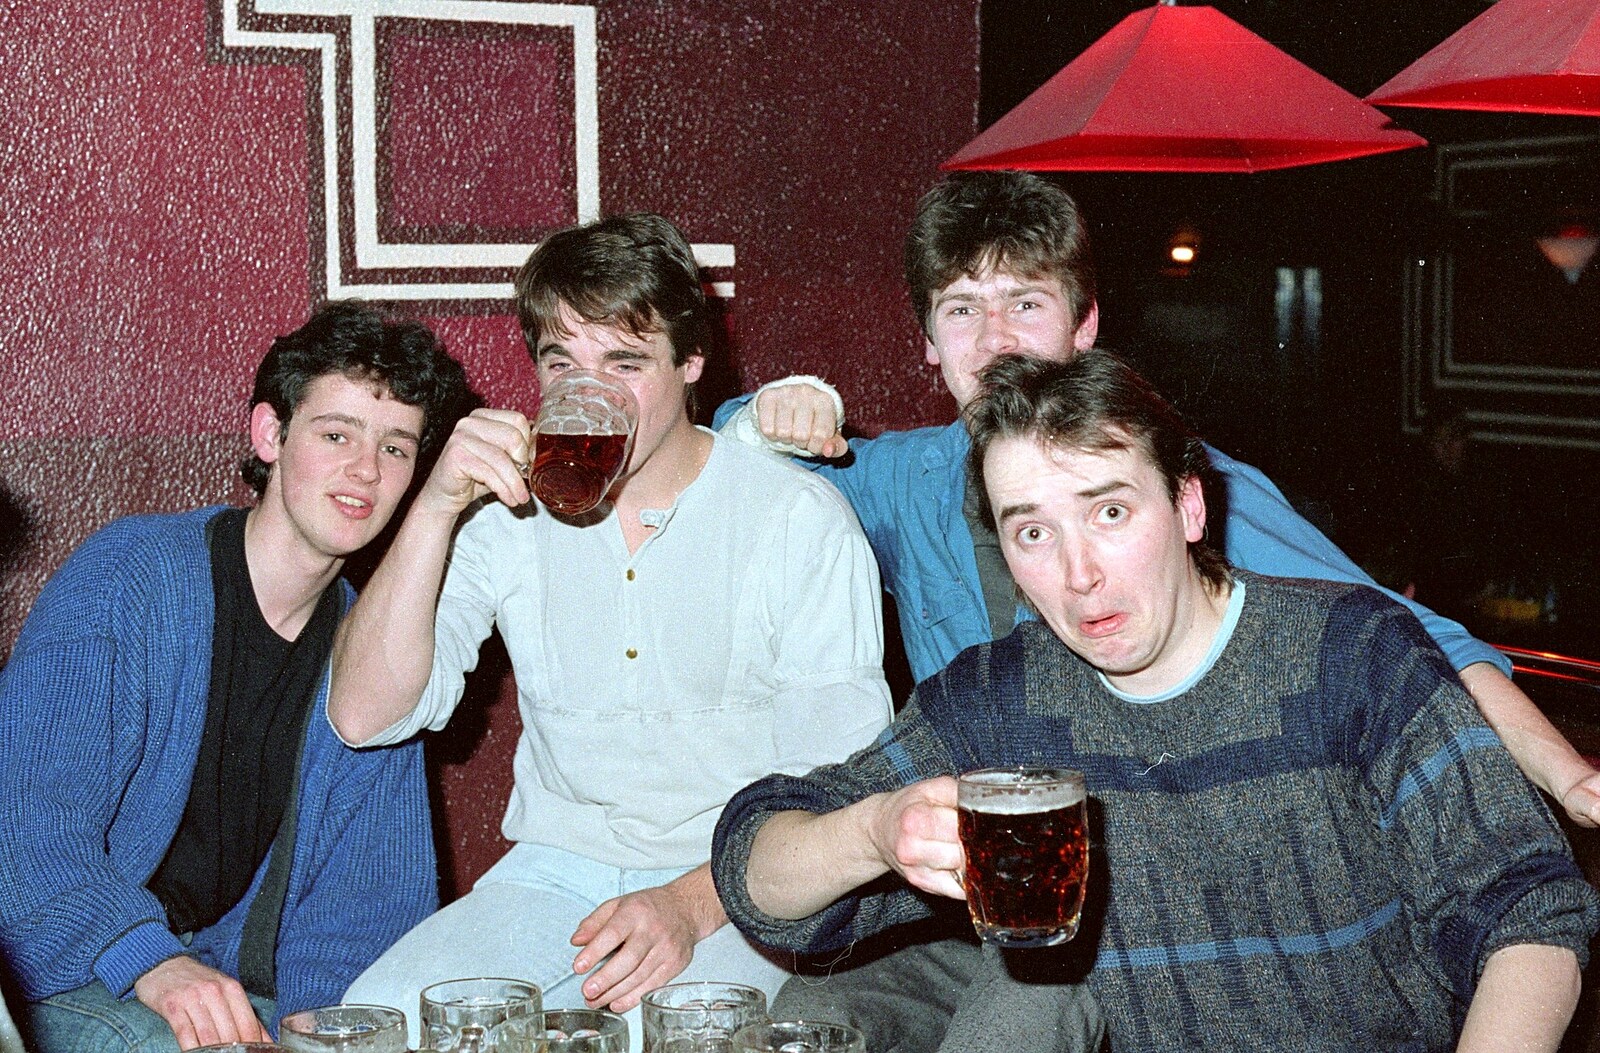 Beer in mugs from Uni: A Party in Snobs Nightclub, Mayflower Street, Plymouth - 18th October 1986